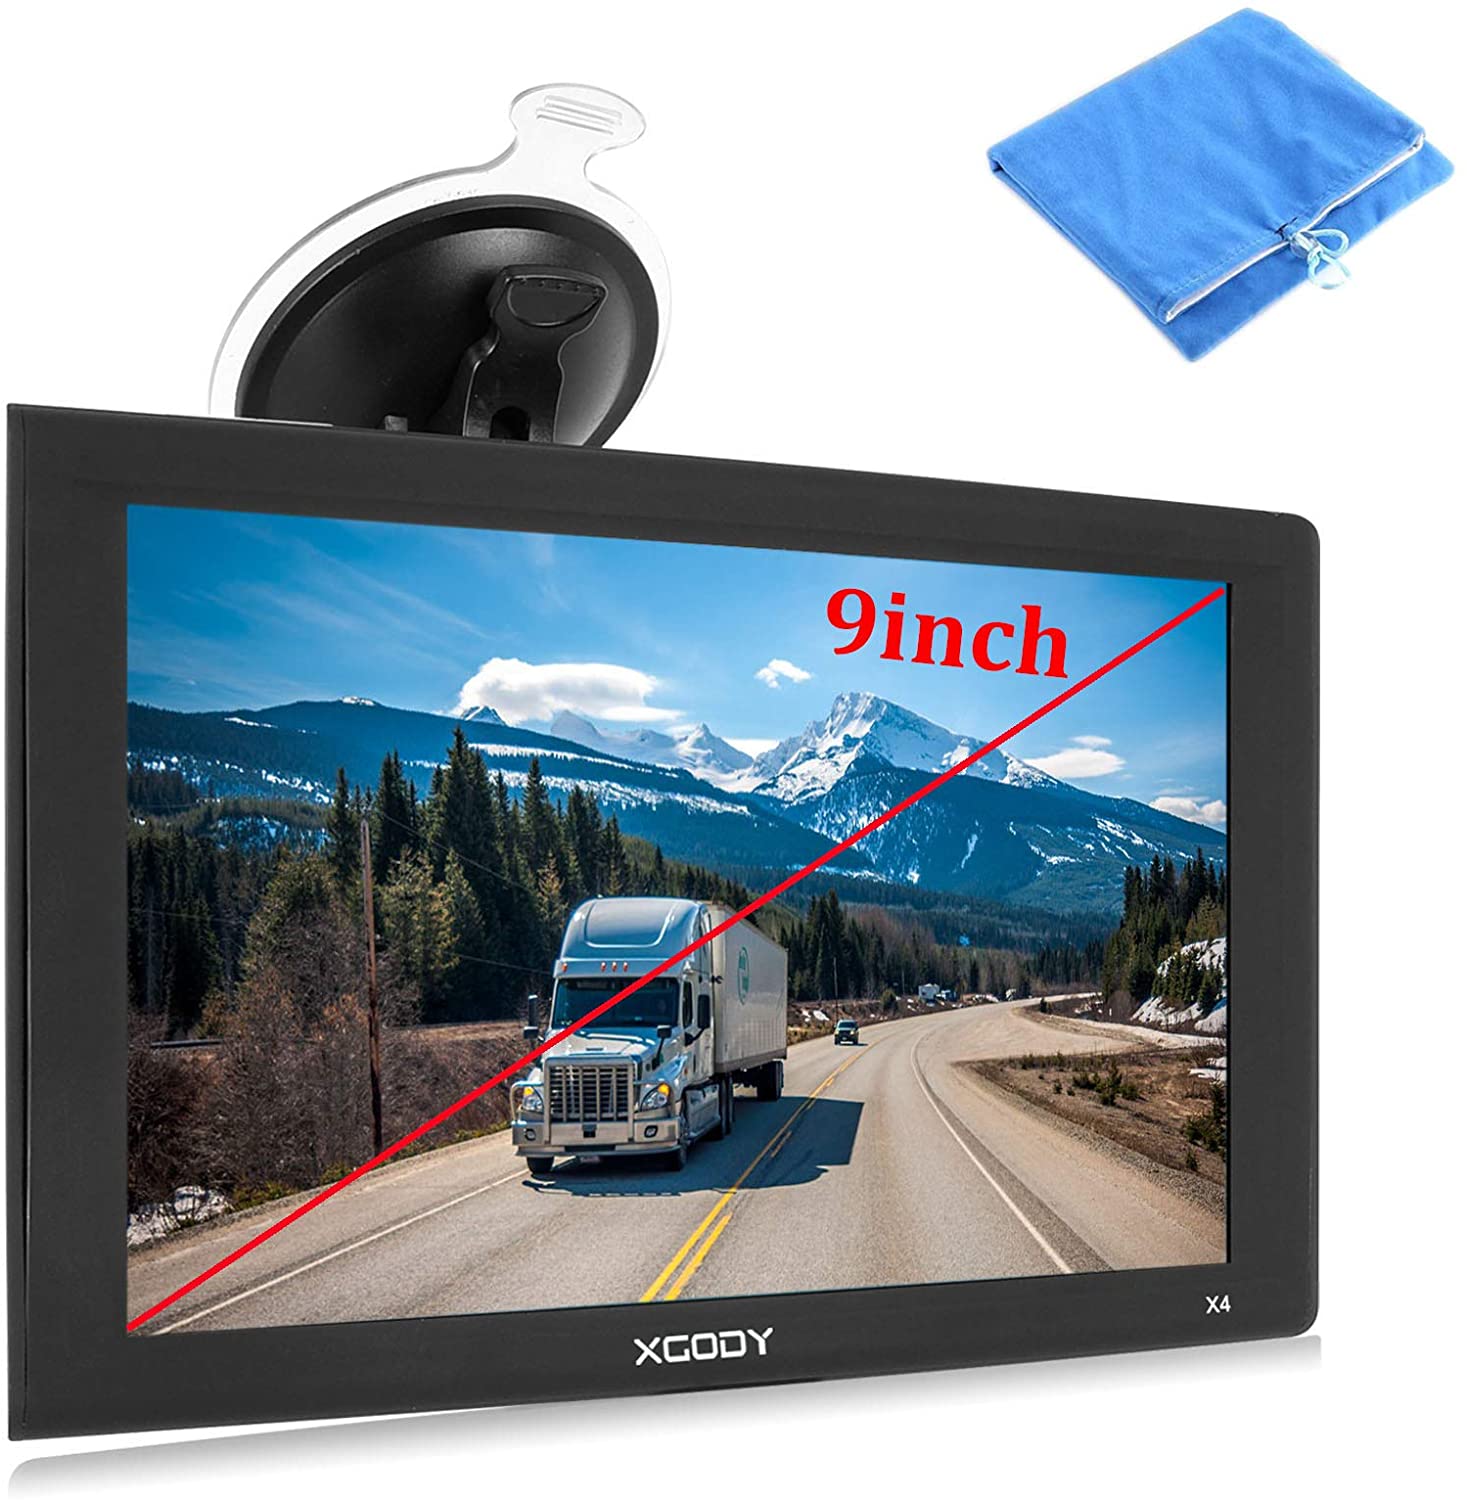 Live Voice Navigation 7 inch 256MB-8GB HD Touch Screen Car GPS Free Lifetime Map Updates GPS Navigation for Car Fast Positioning，Support Speed and Red Light Warning 